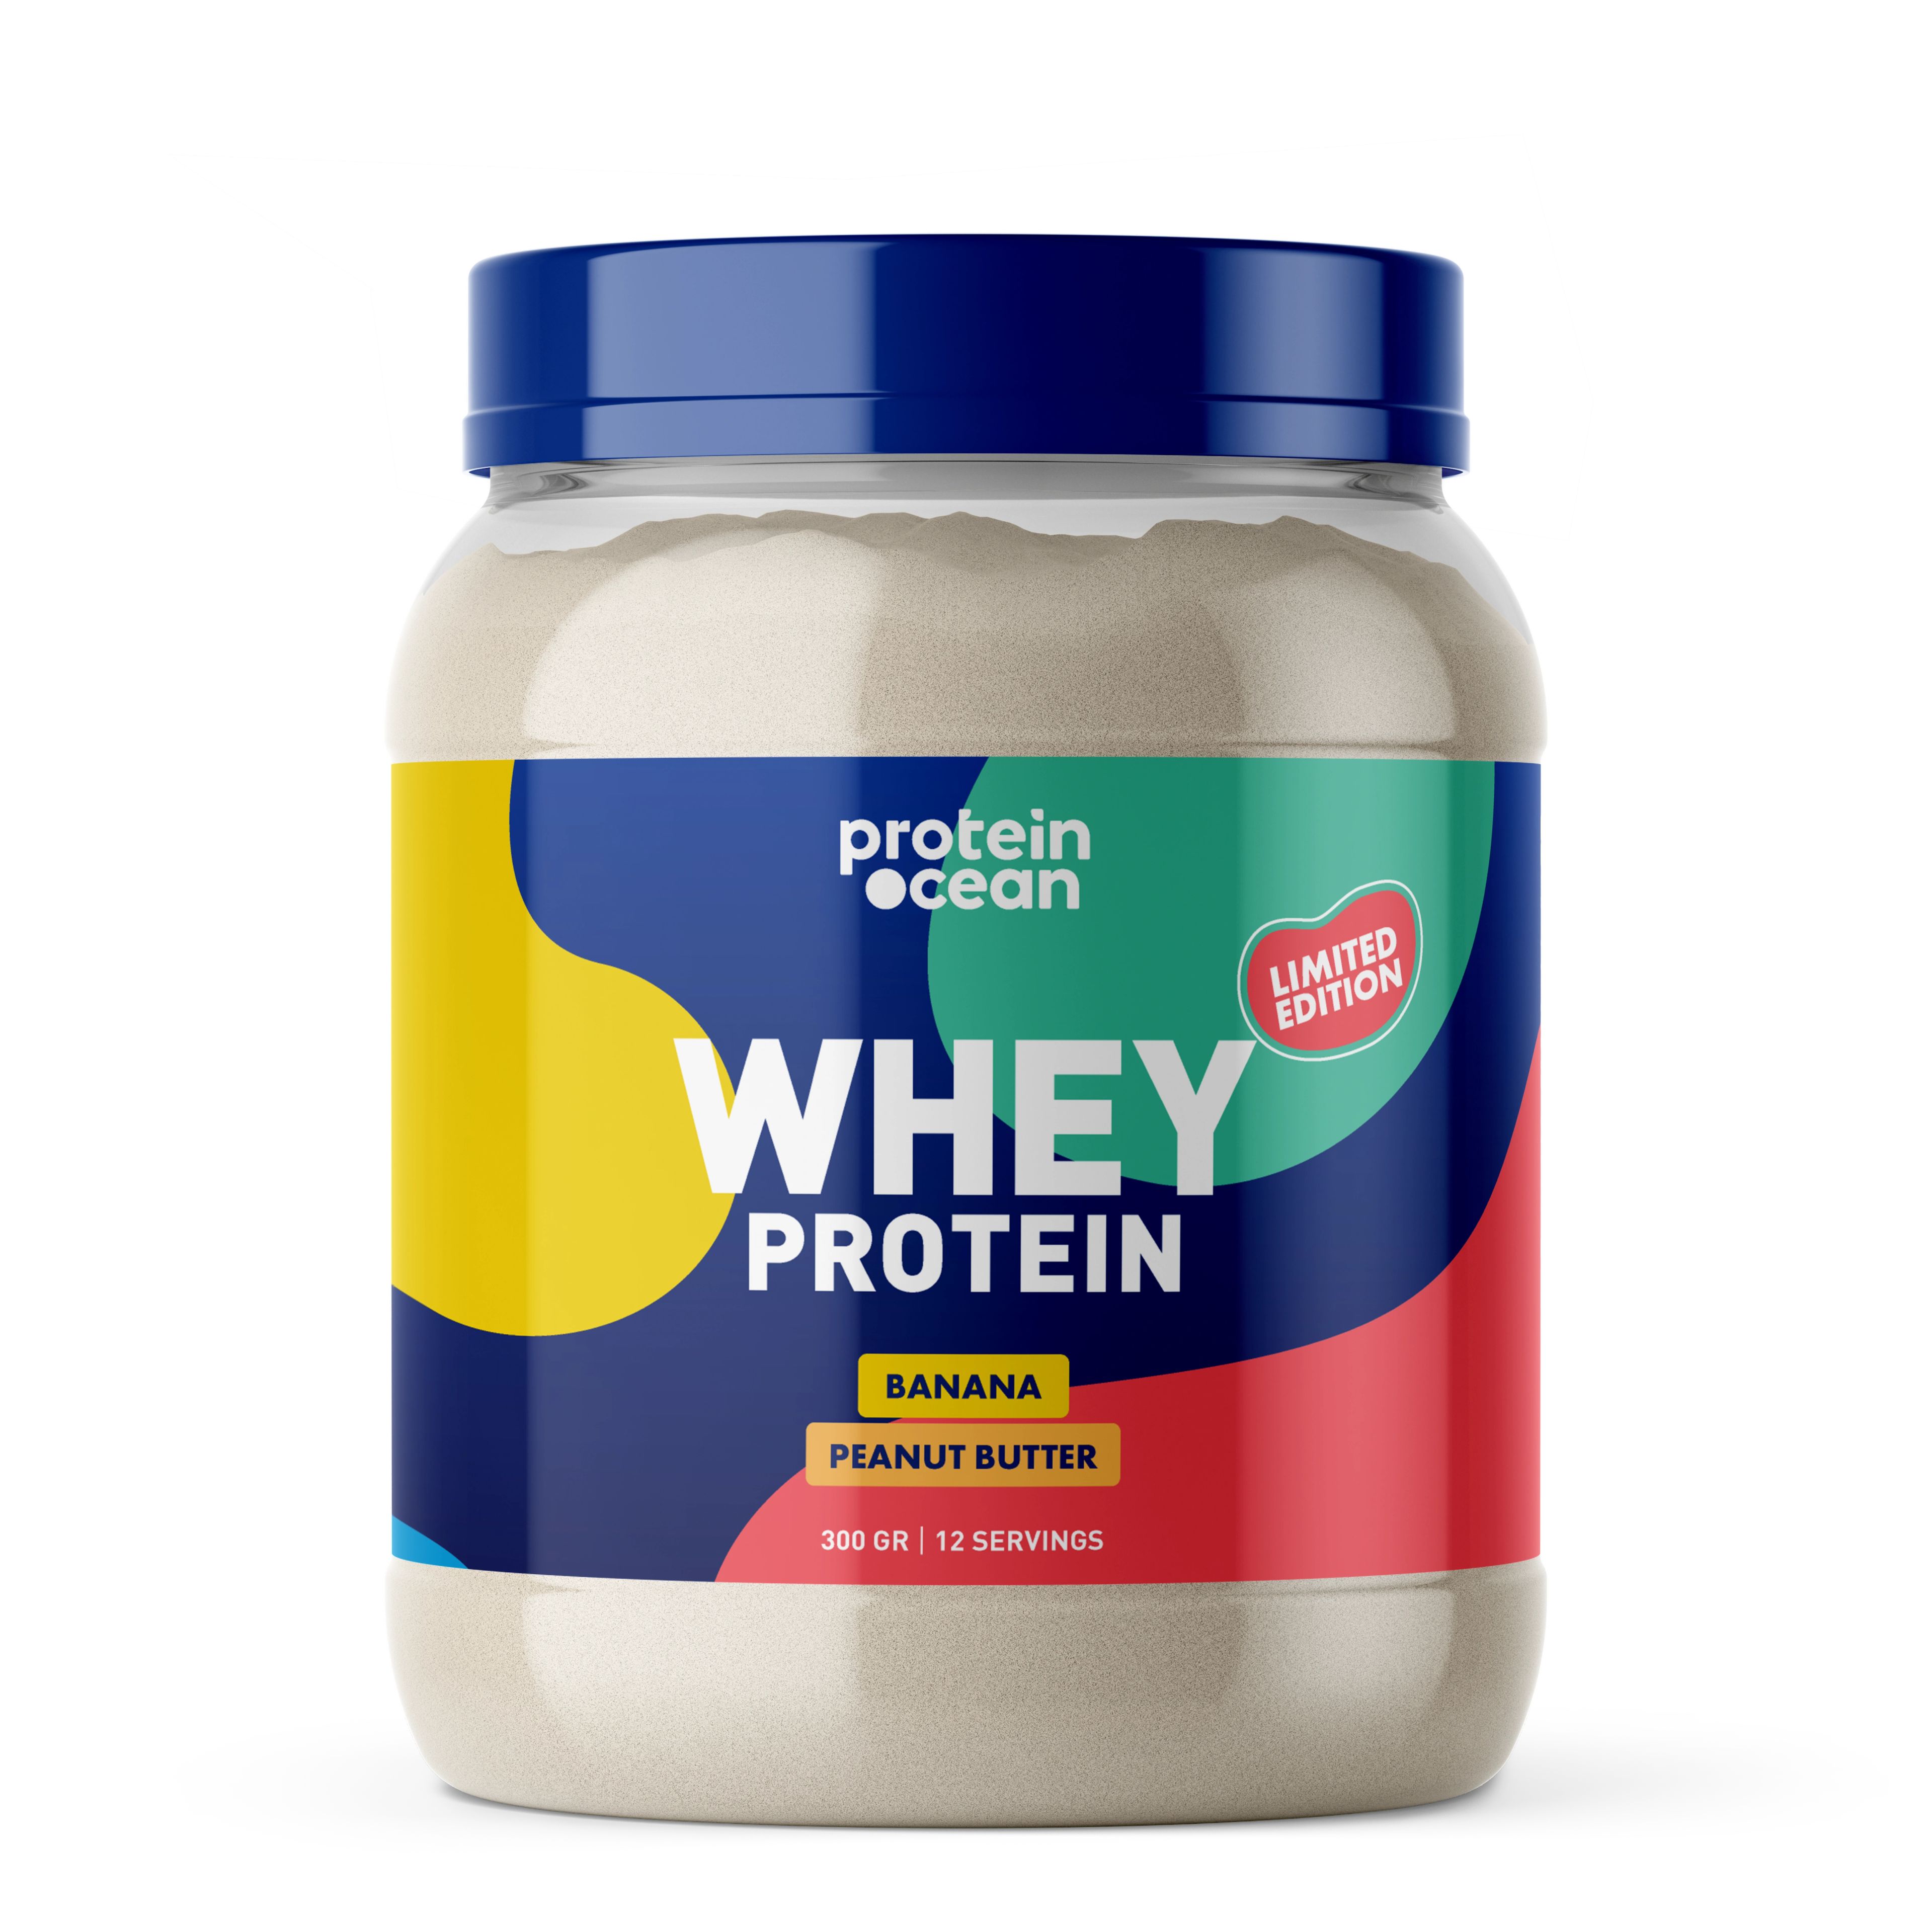 WHEY PROTEIN™ LIMITED EDITION